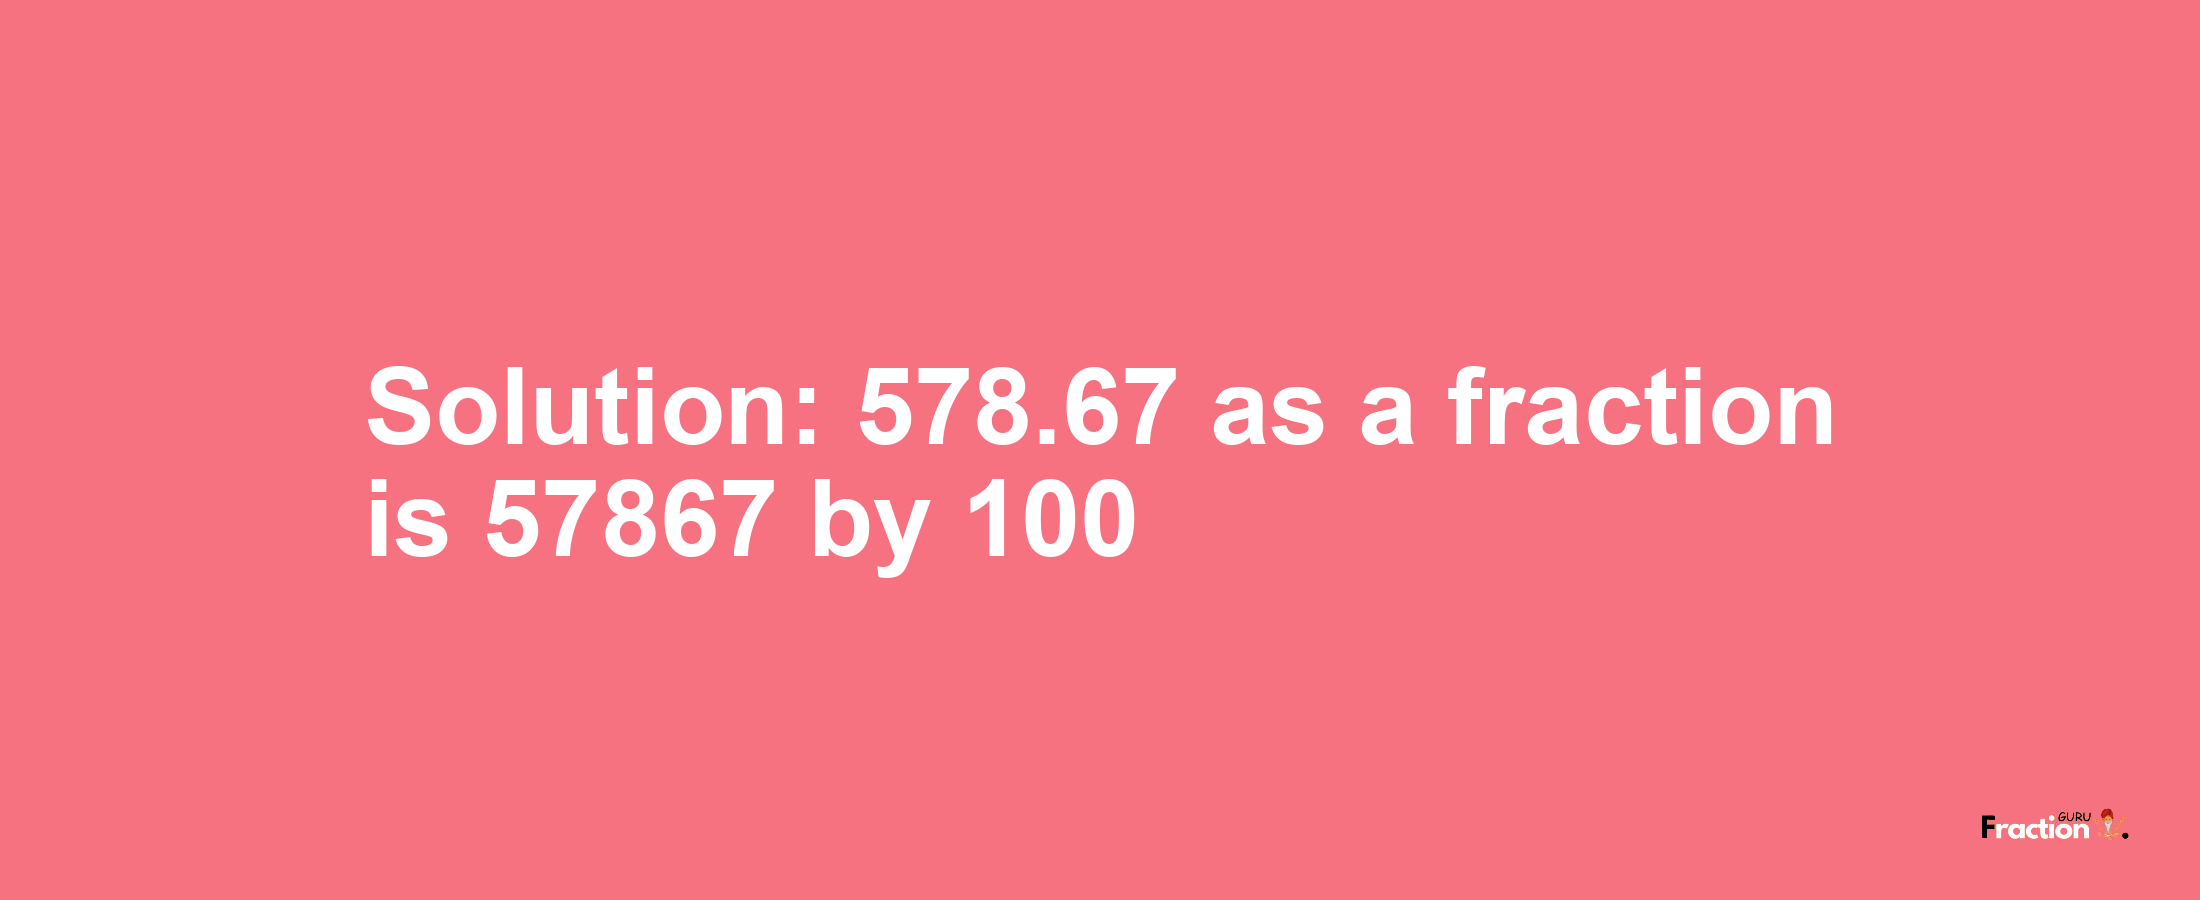 Solution:578.67 as a fraction is 57867/100